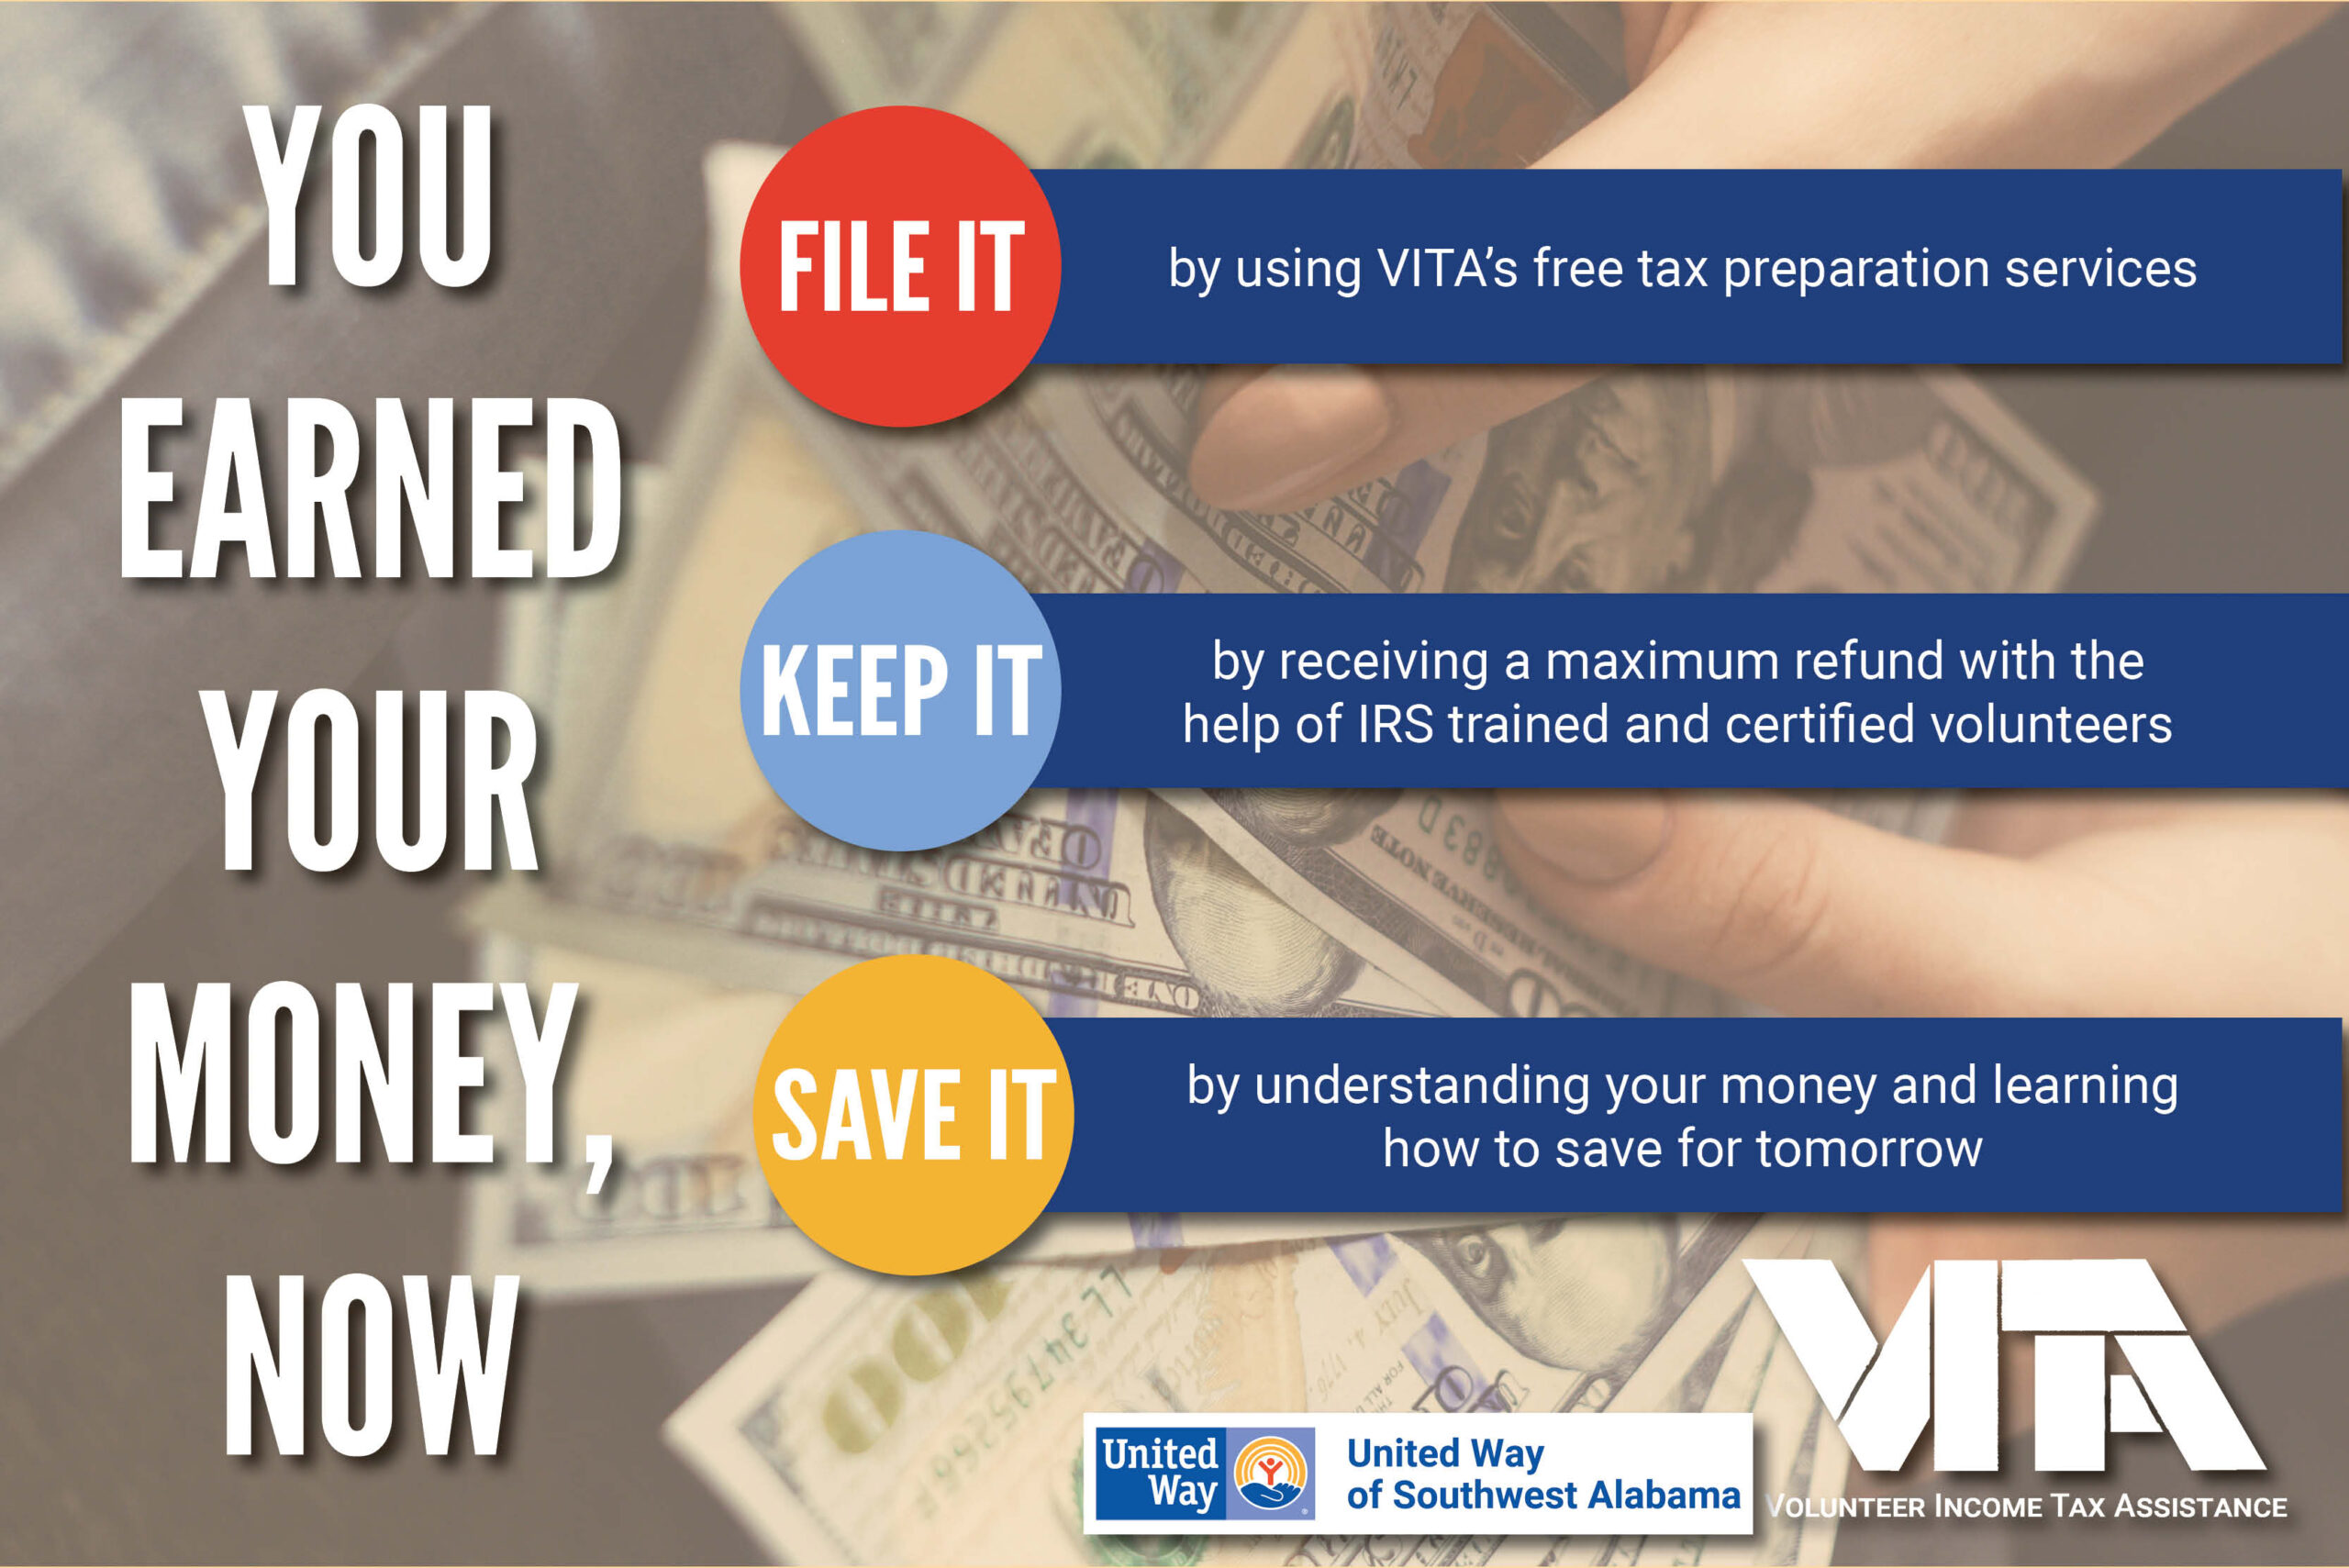 You earned your money, now keep it by using VITA's free tax preparation services; File it by receiving a maximum refund with the help of the IRS trained and certified volunteers; and Save it by understanding your money and learning how to save for tomorrow.